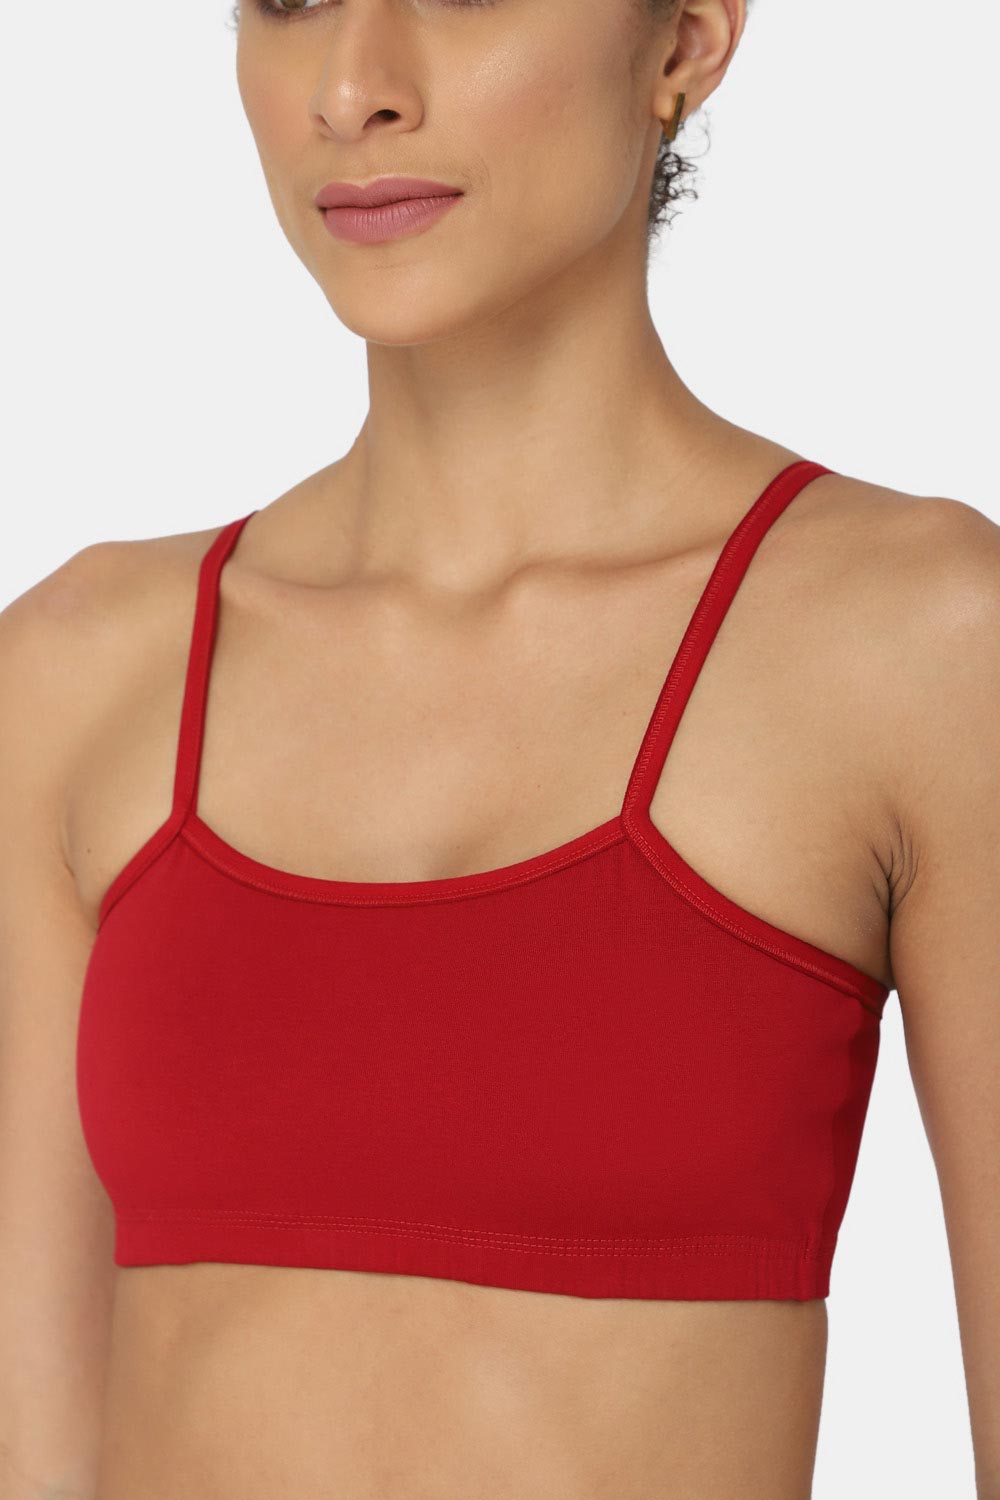 Intimacy Beginners-Bra Special Pack - Red